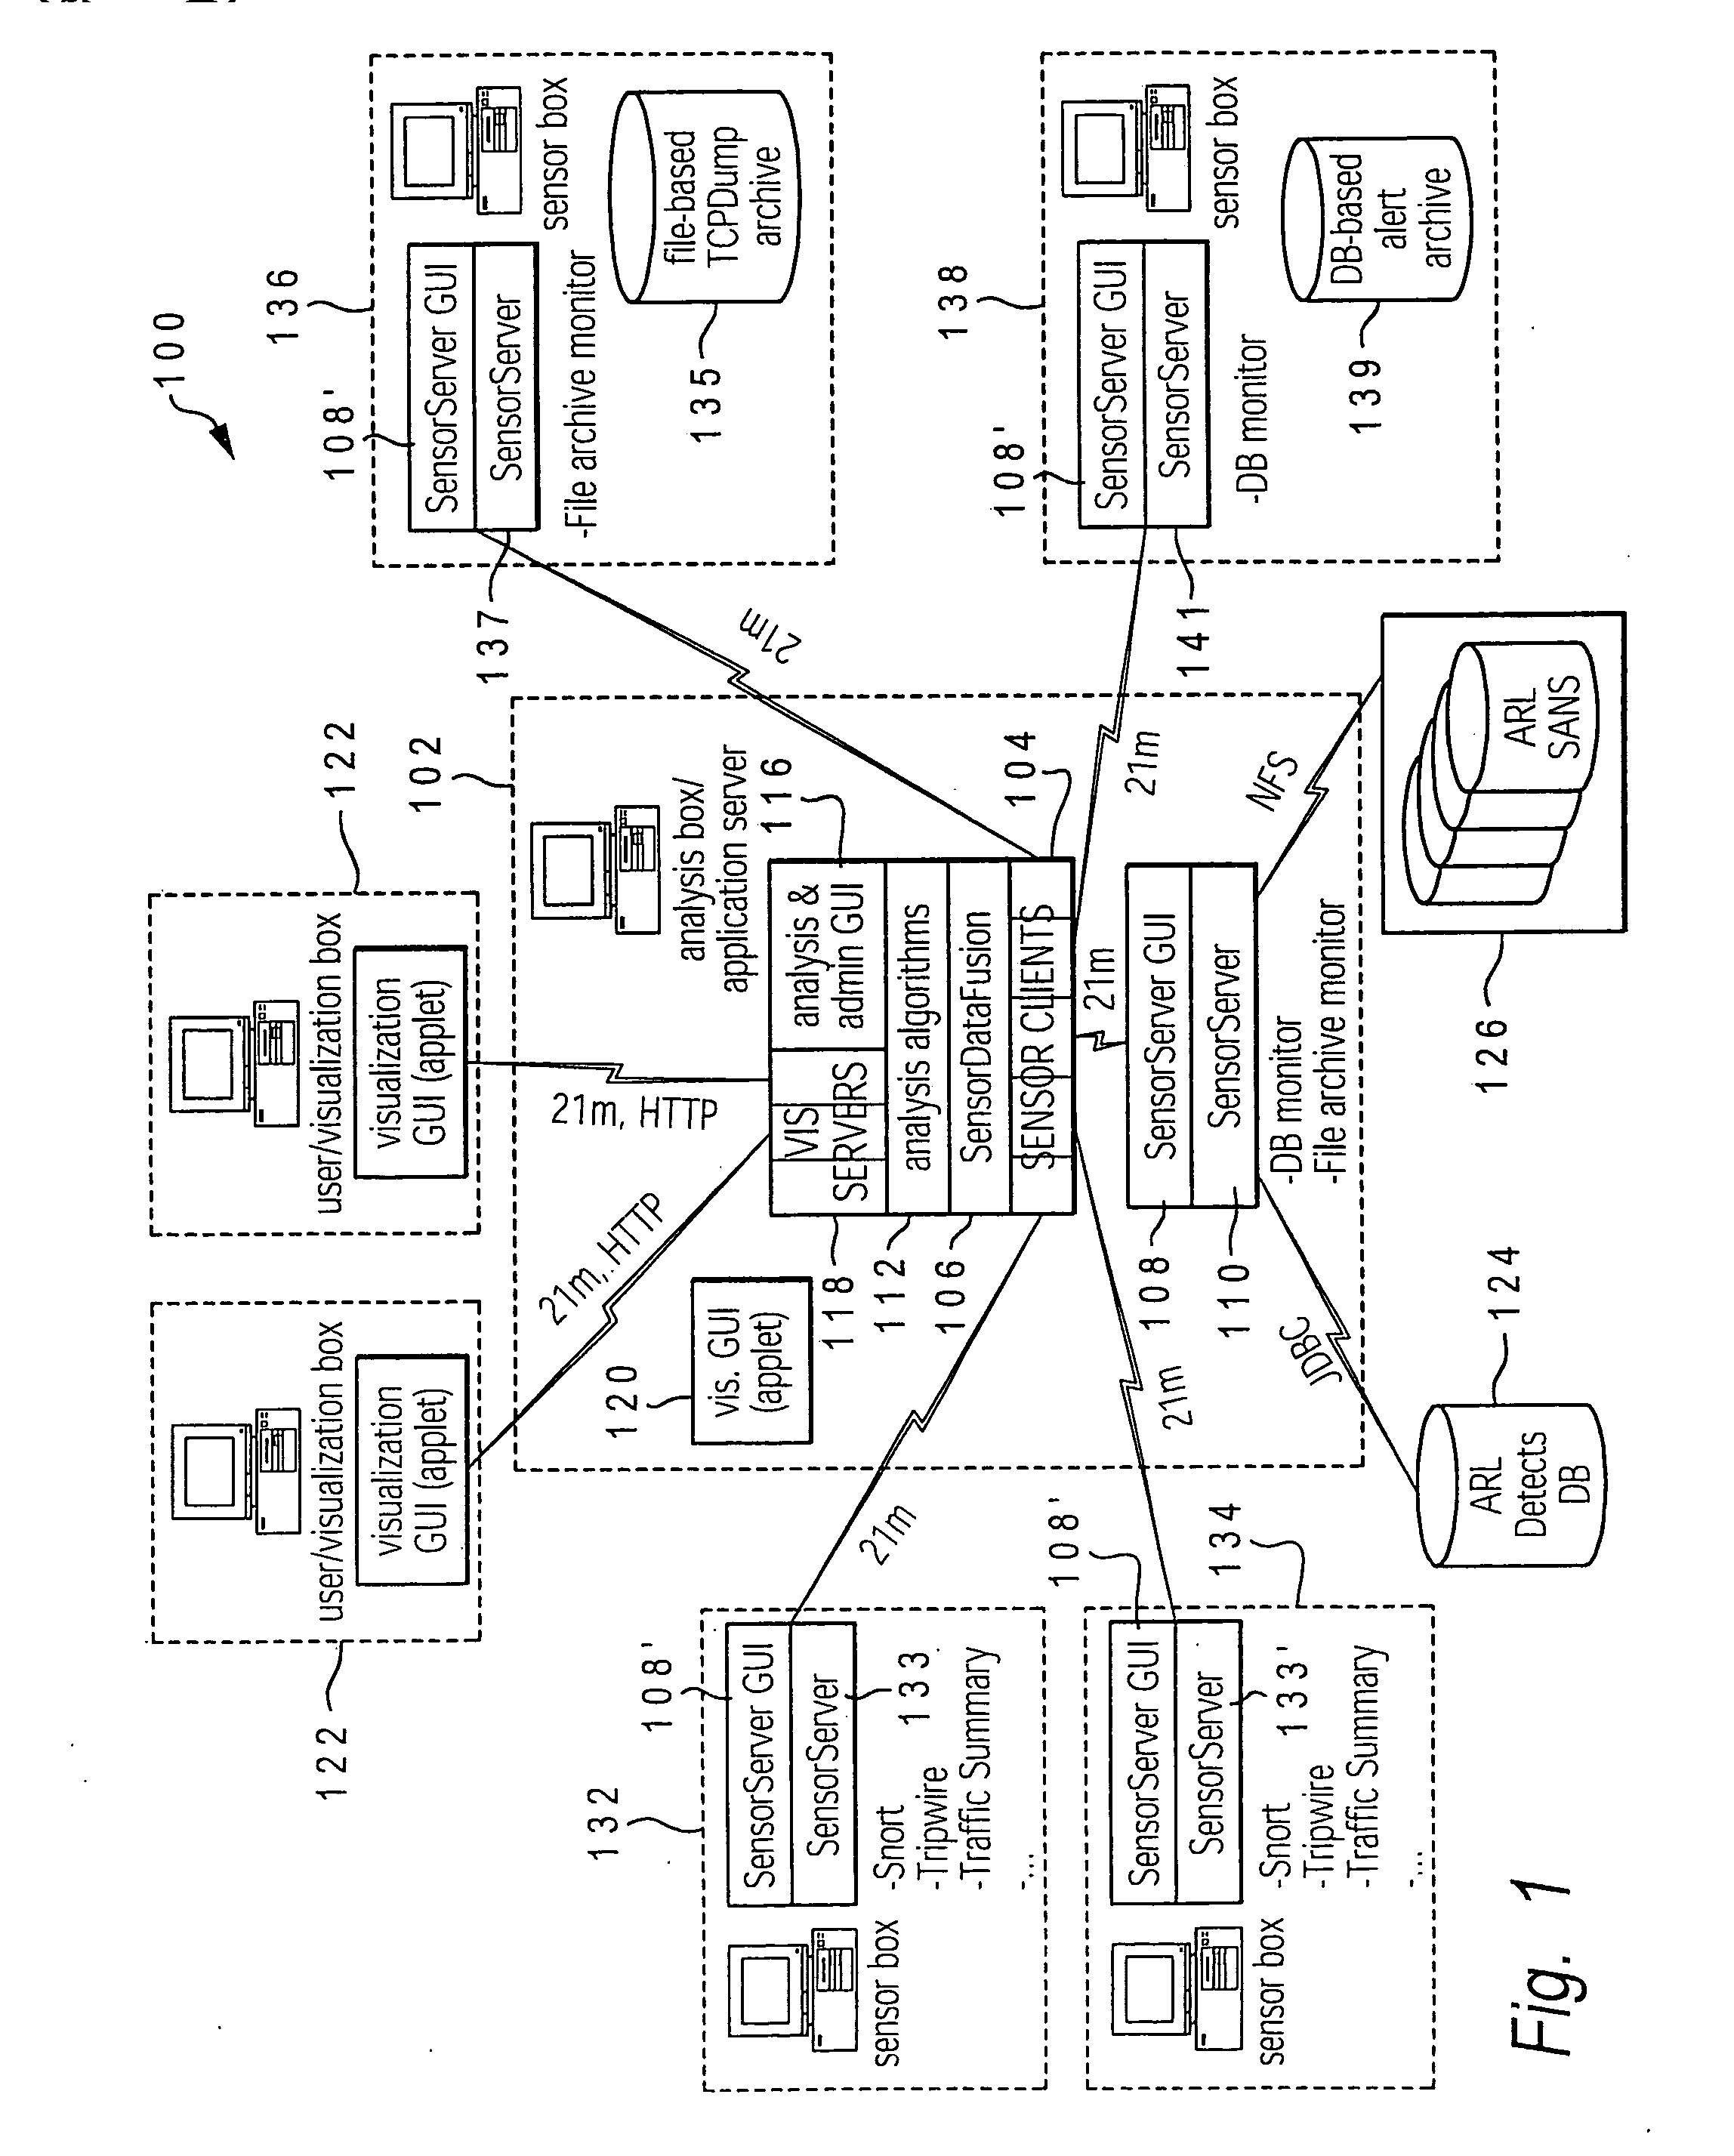 Intelligent intrusion detection system utilizing enhanced graph-matching of network activity with context data